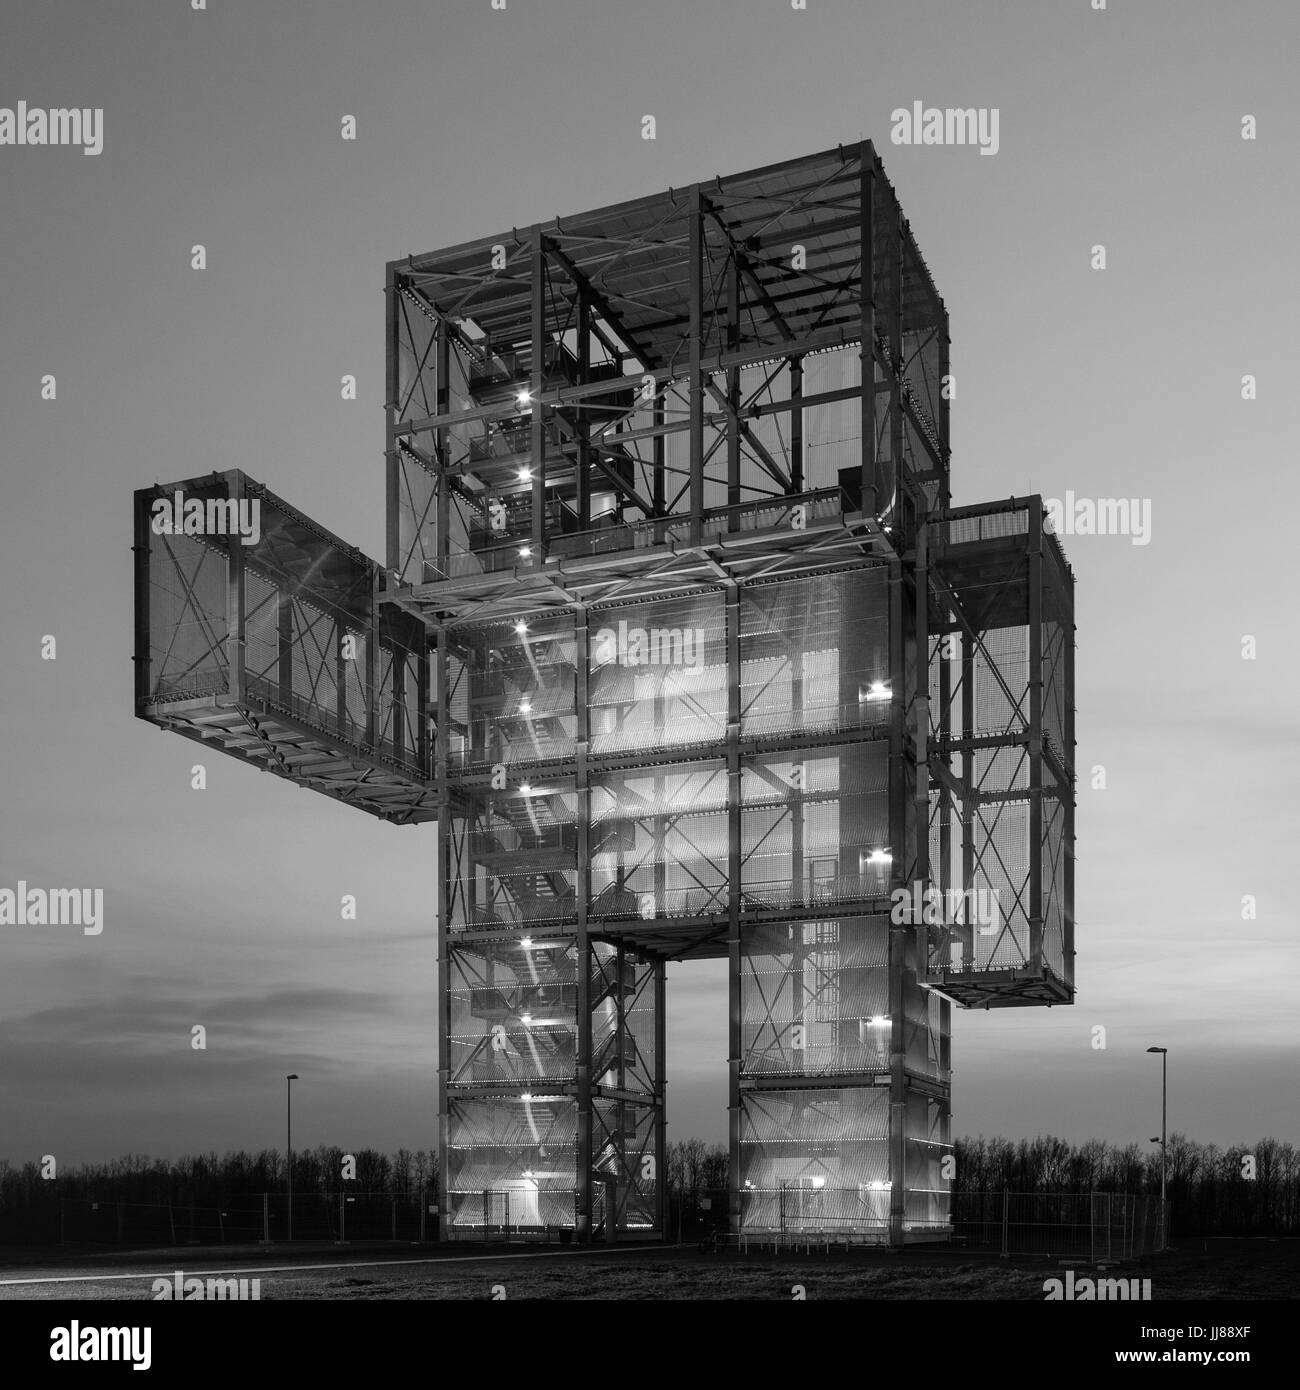 Europe, Germany, North Rhine-Westphalia, the illuminated Indemann near the village Lucherberg in the district Dueren east of the city of Aachen on top Stock Photo